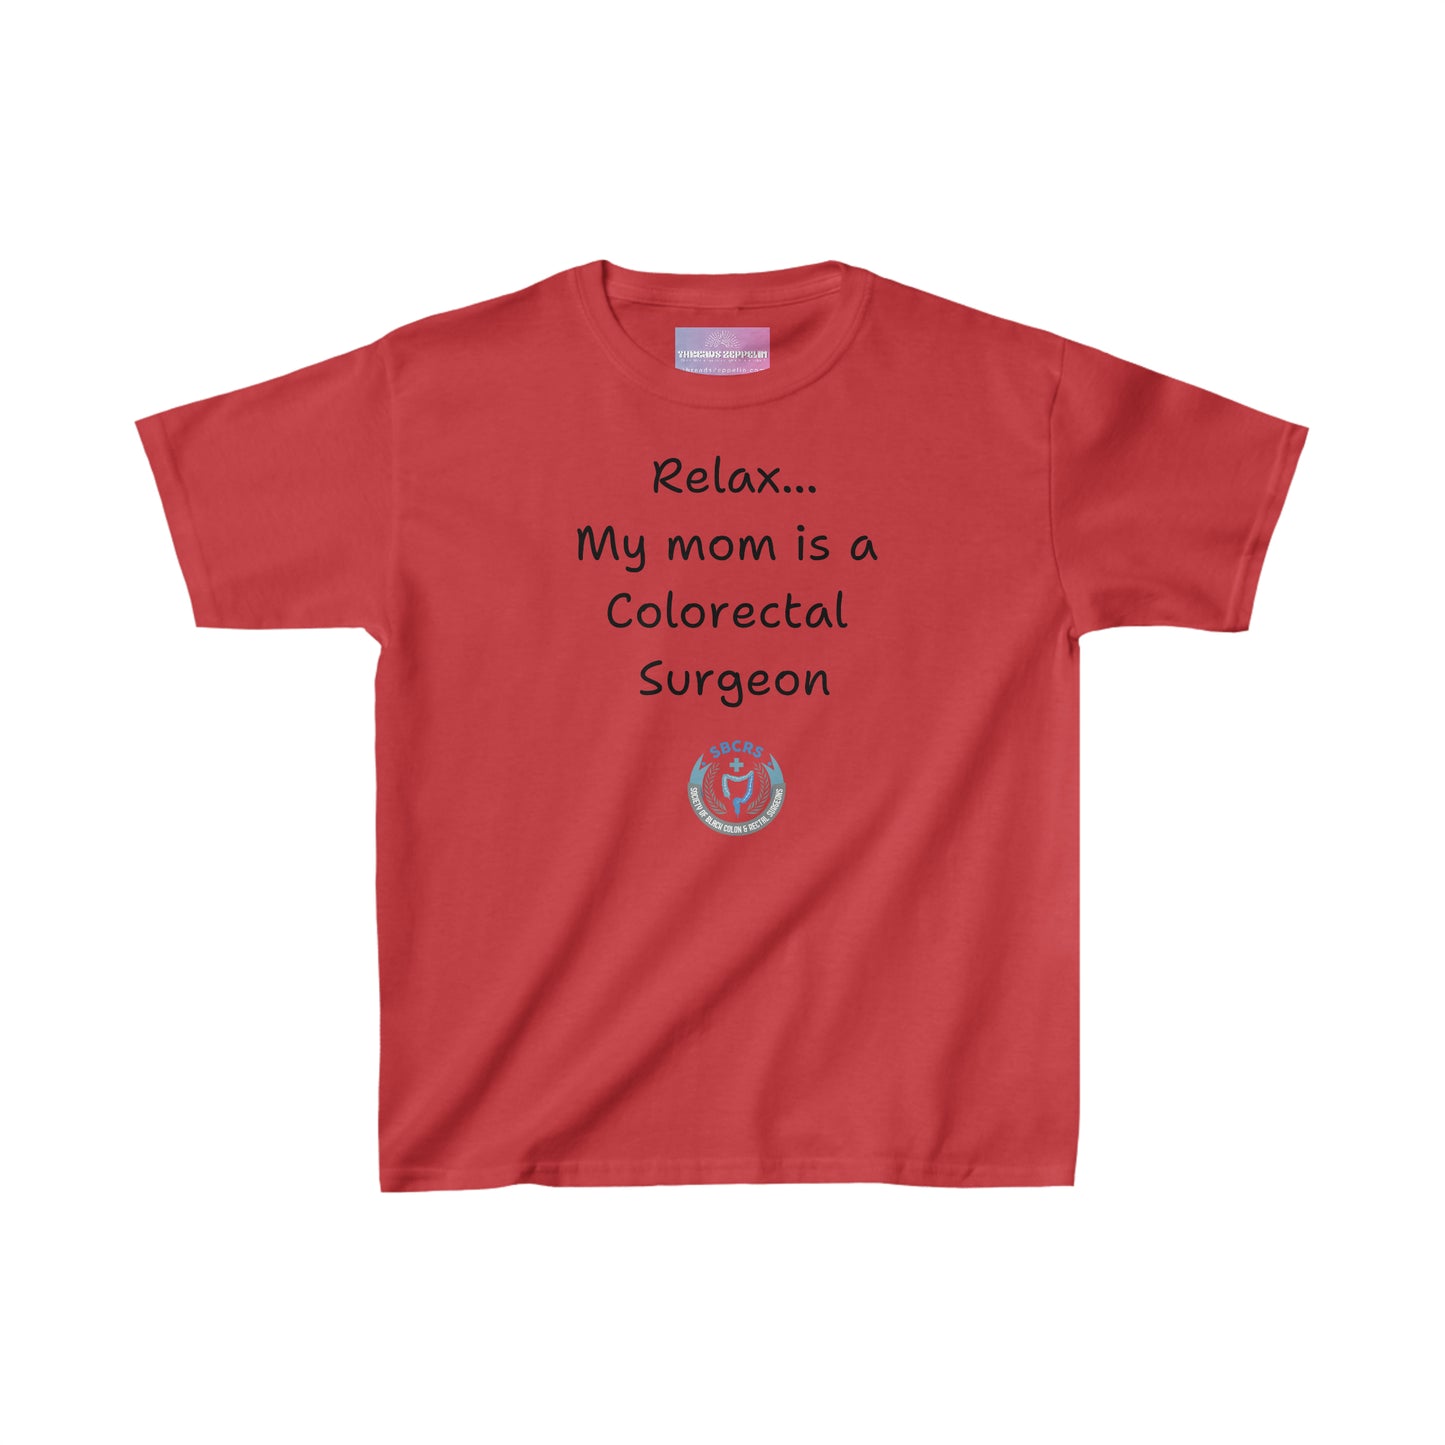 Relax, My Mom is a Colorectal Surgeon Kids Heavy Cotton Tee